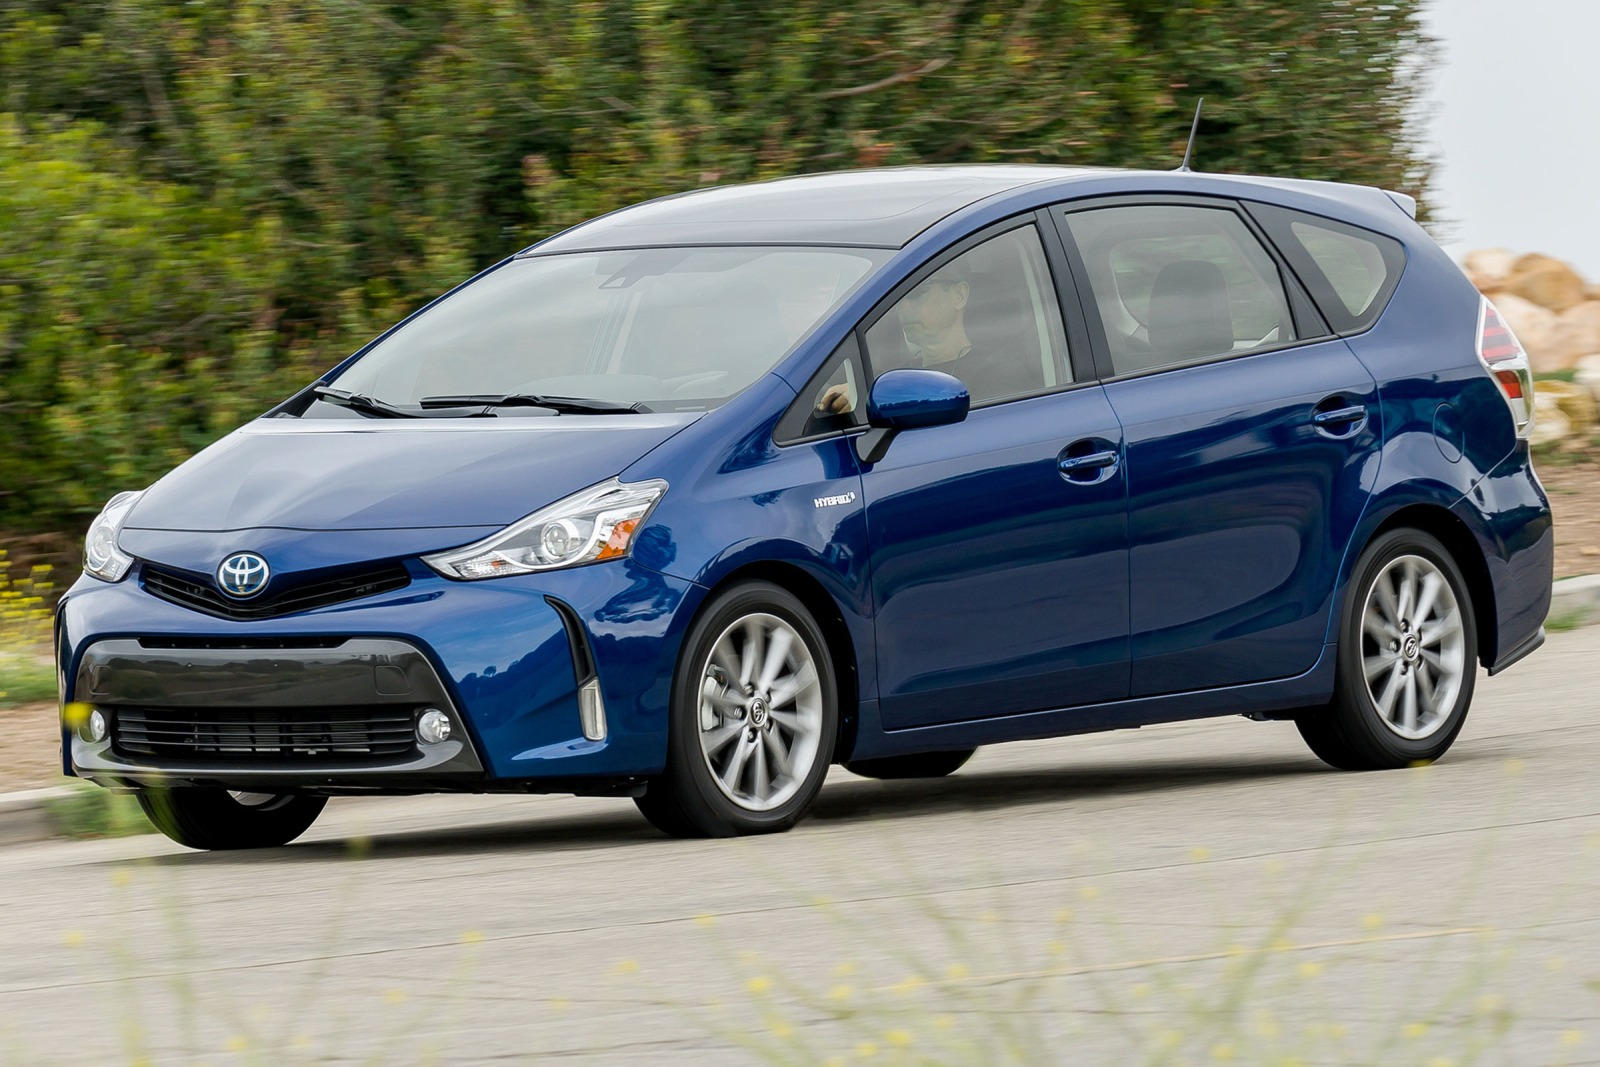 Used 2016 Toyota Prius v For Sale Near Me CarBuzz